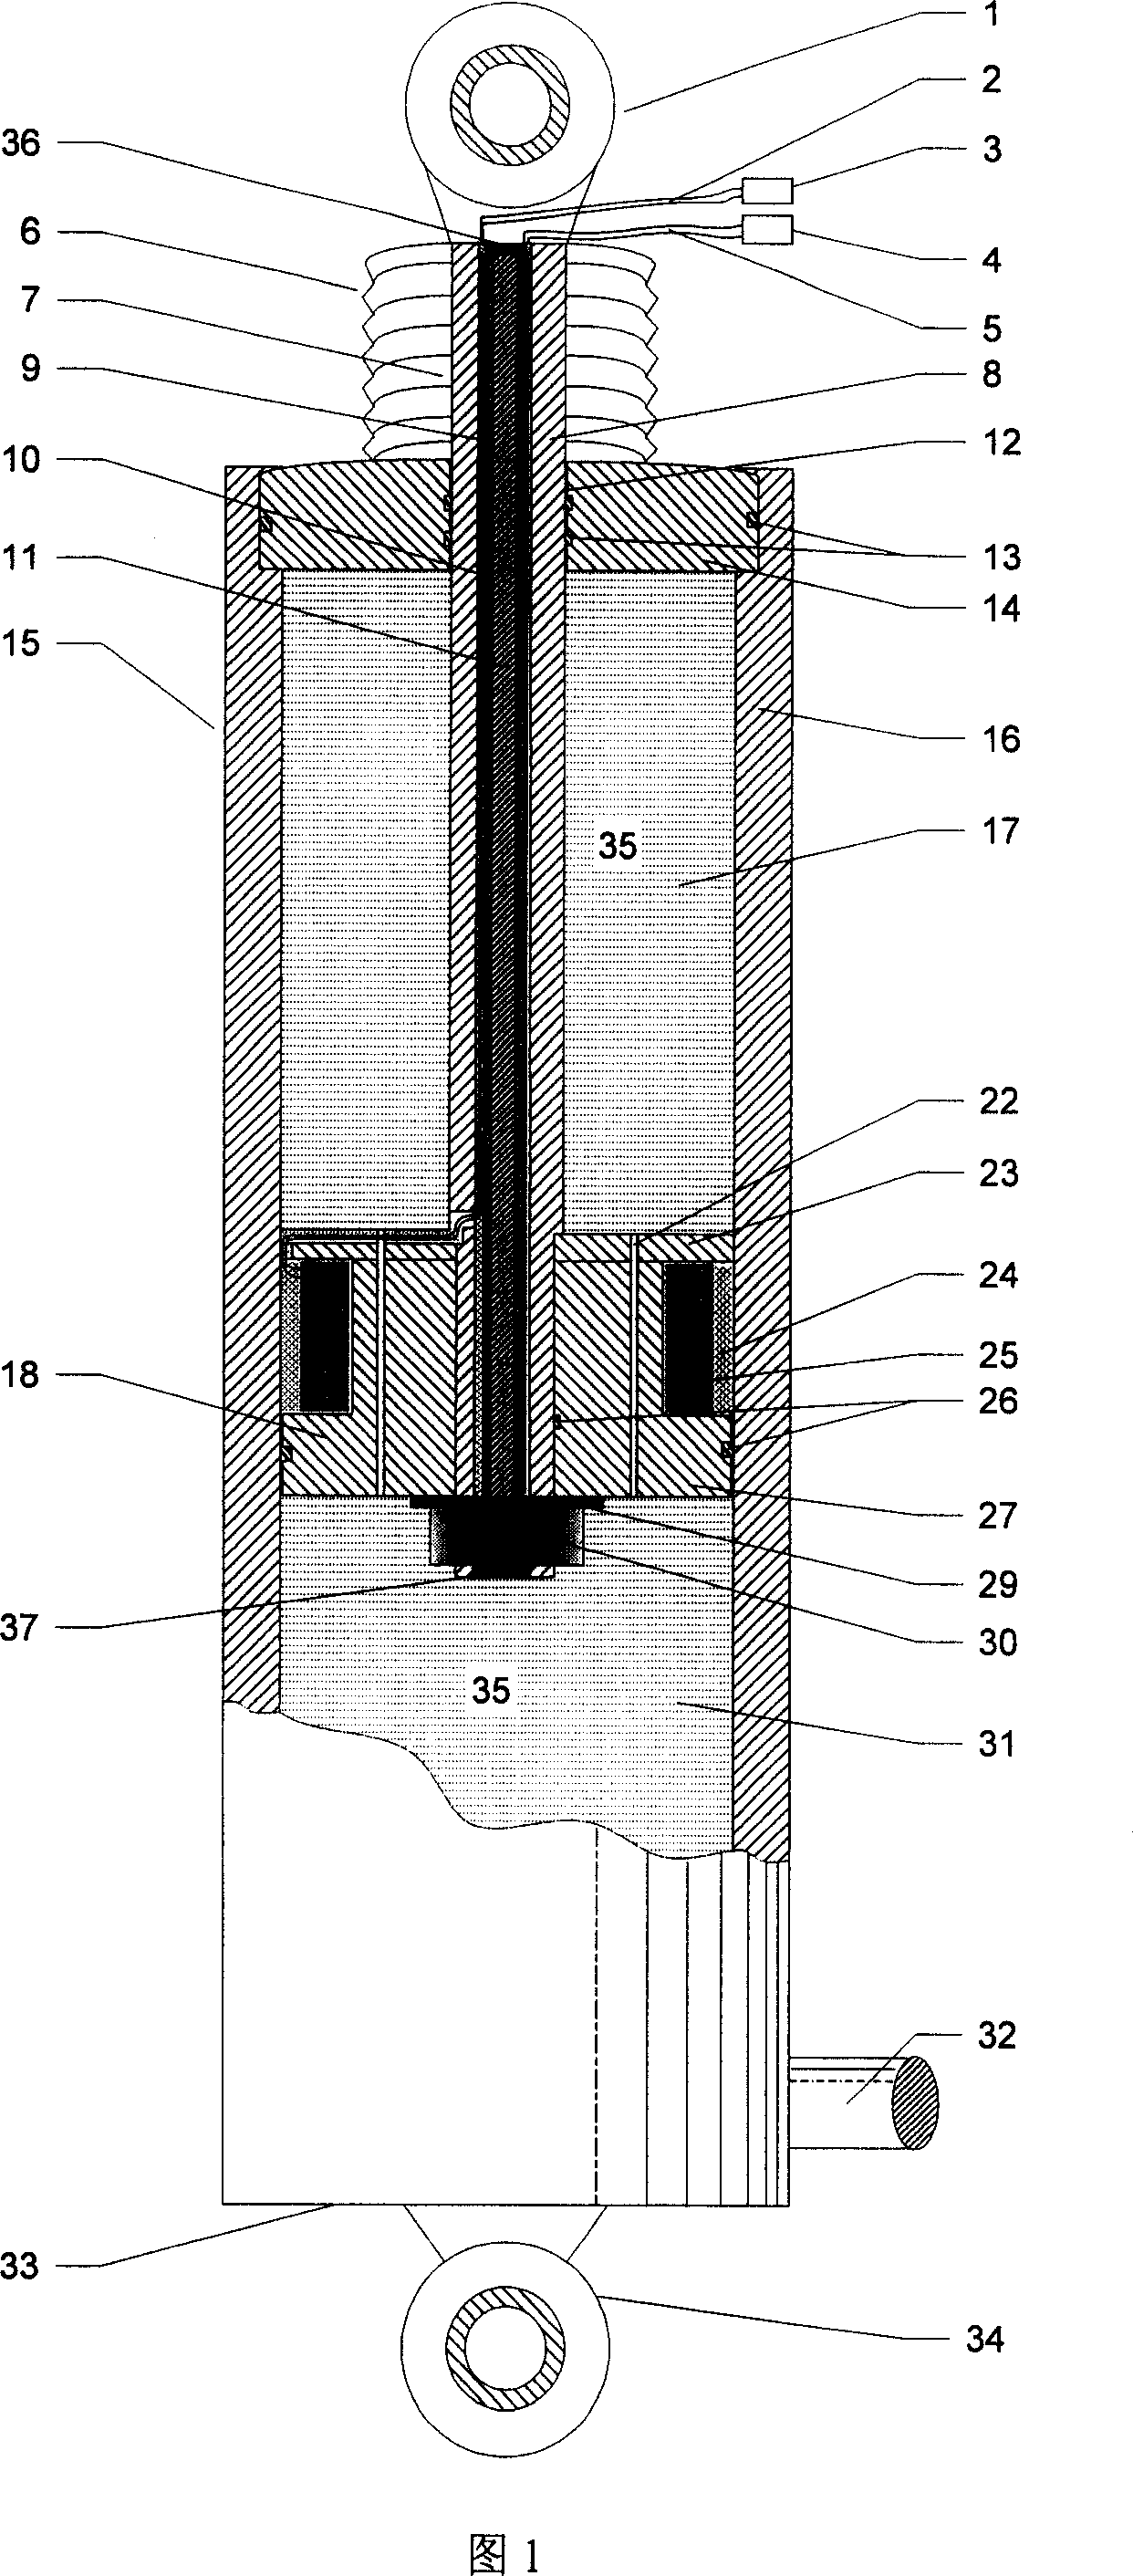 Vehicle suspension vibration damper with relative velocity self-sensing function